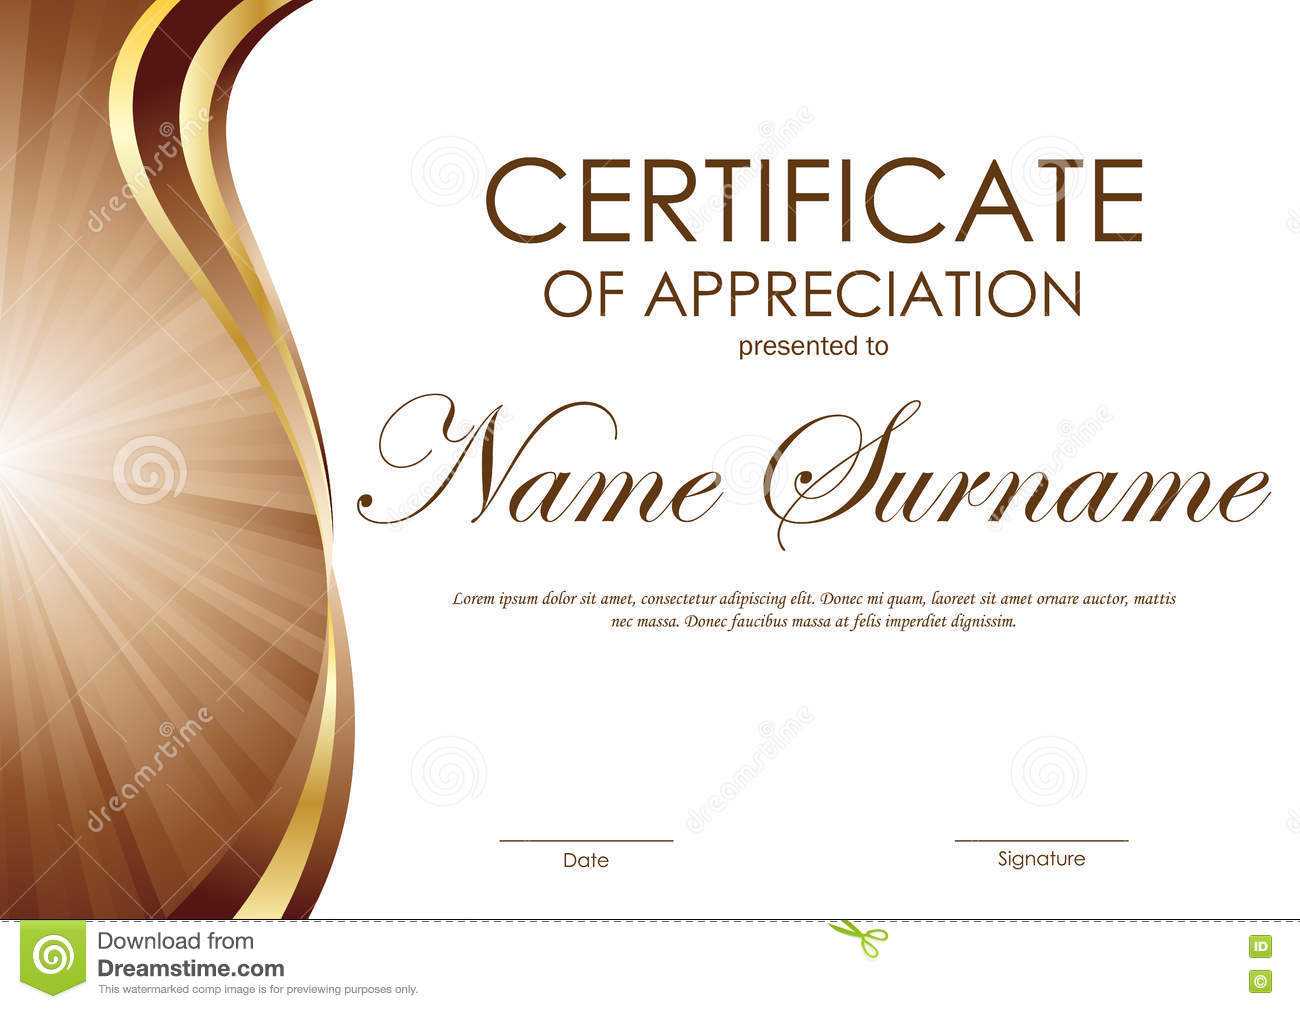 Certificate Of Appreciation Template Stock Vector Pertaining To Certificate Templates For Word Free Downloads